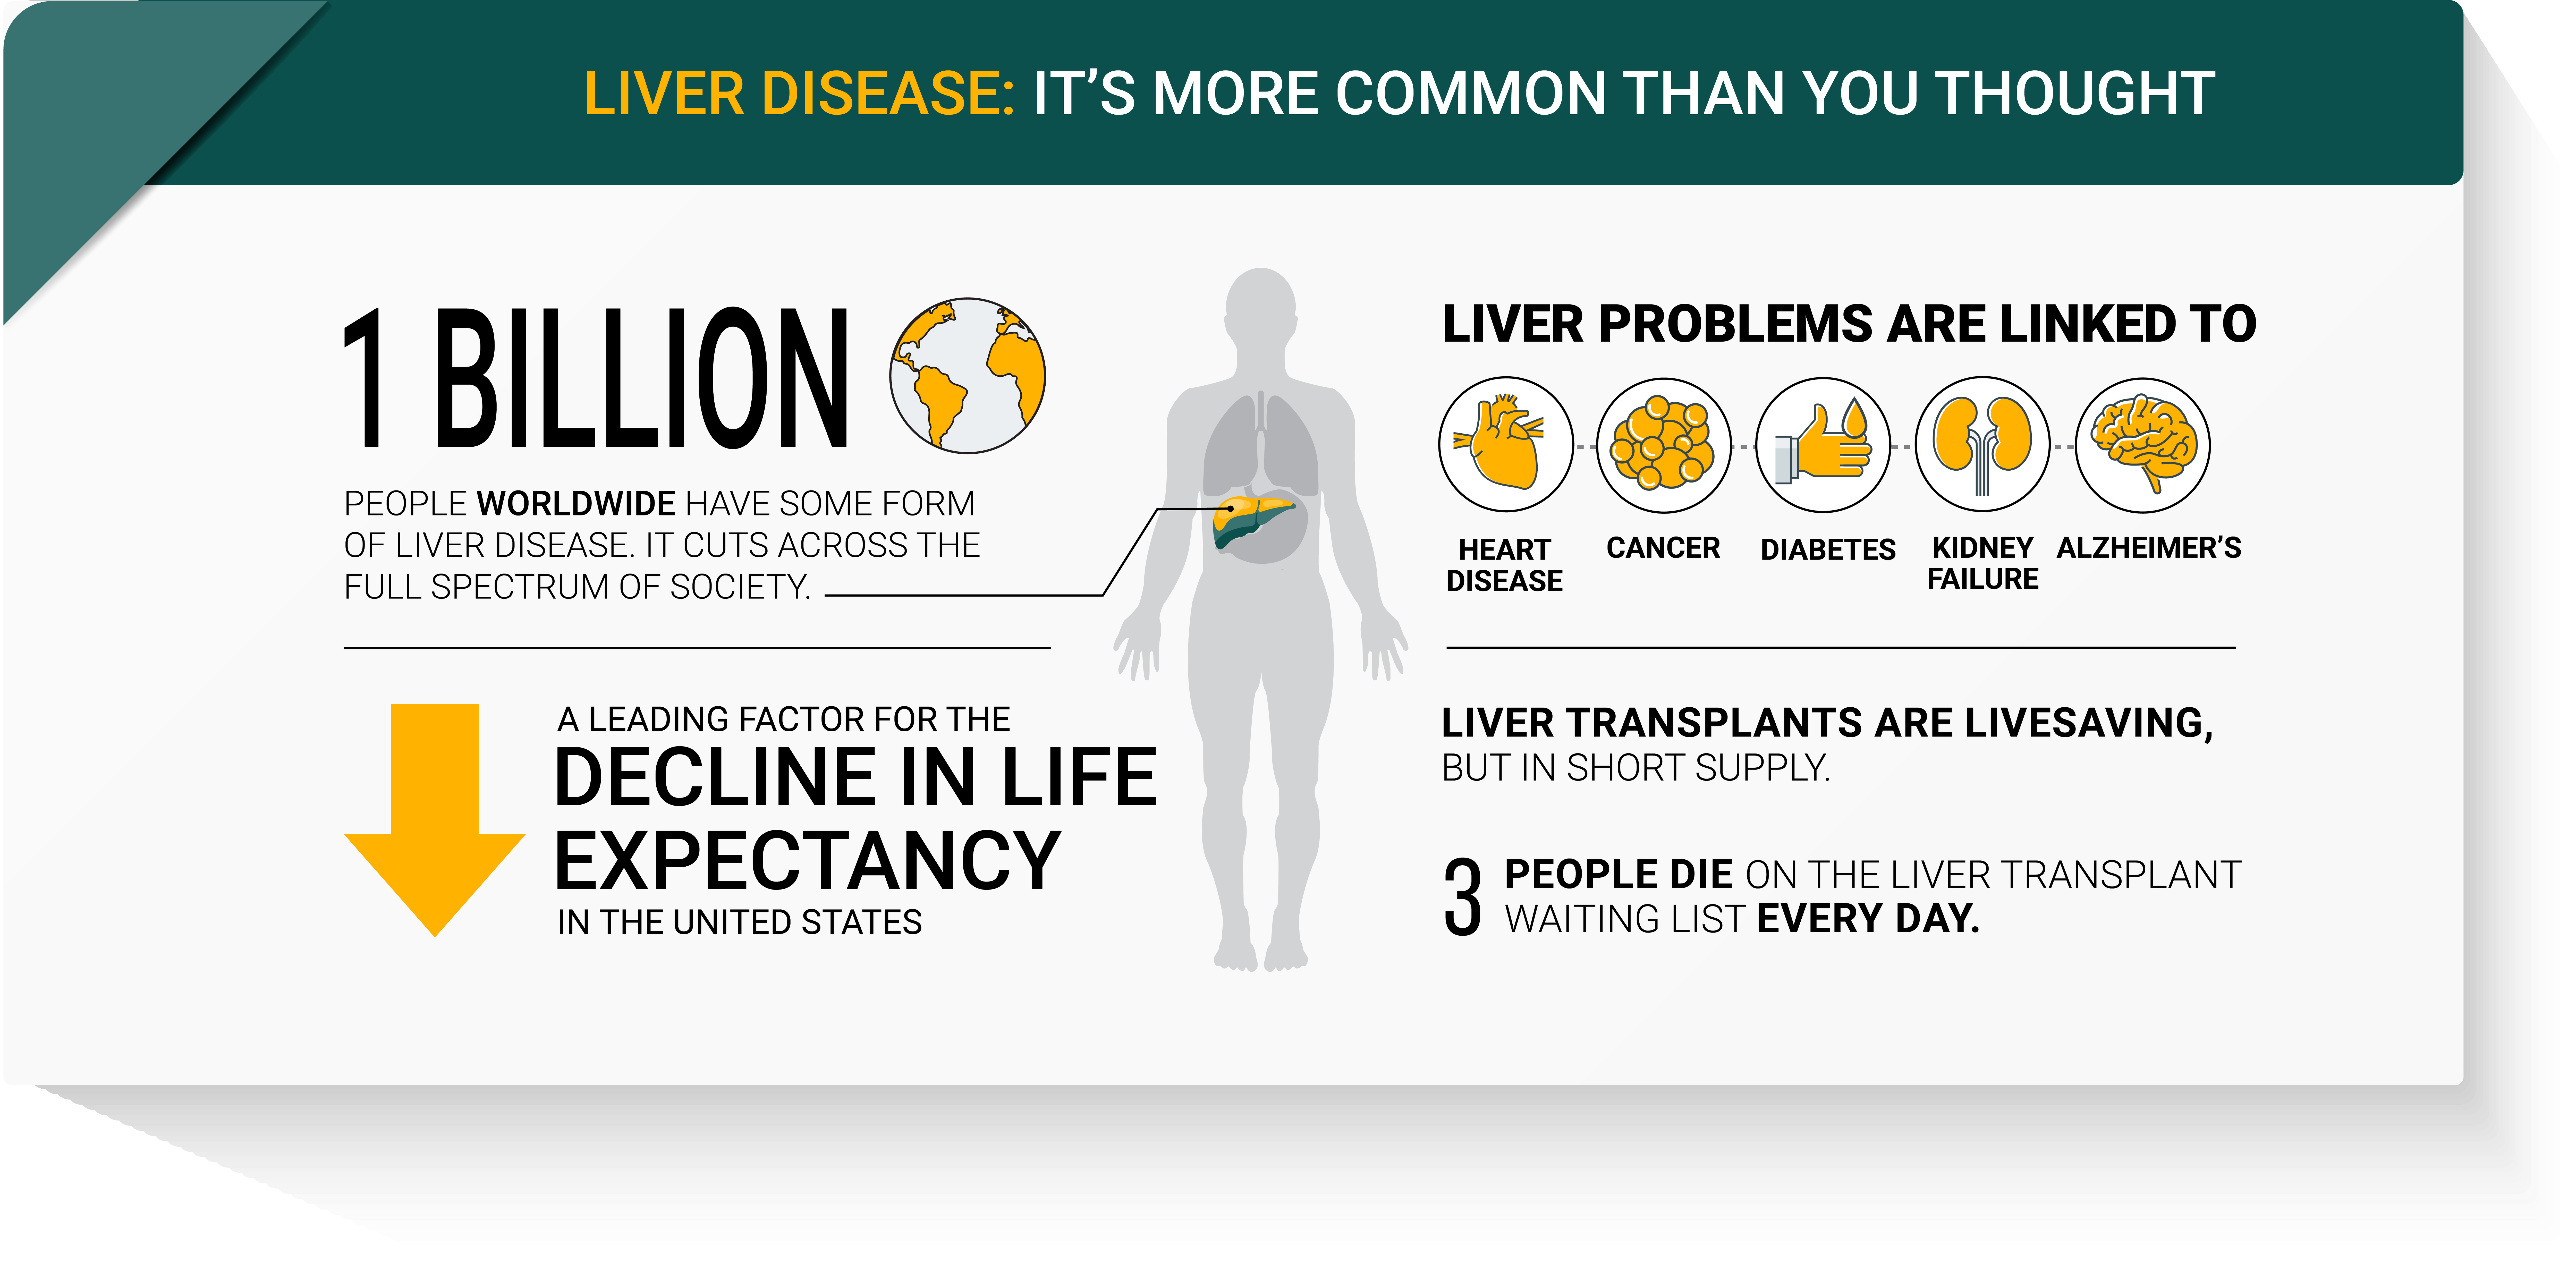 Liver Disease: It’s more common than you thought 1 billion people worldwide have some form of liver disease. It cuts across the full spectrum of society. A leading factor for the decline in life expectancy in the United States Liver problems are linked to heart disease, cancer, diabetes, kidney failure and Alzheimer's Liver transplants are lifesaving, but in short supply. 3 people die on the liver